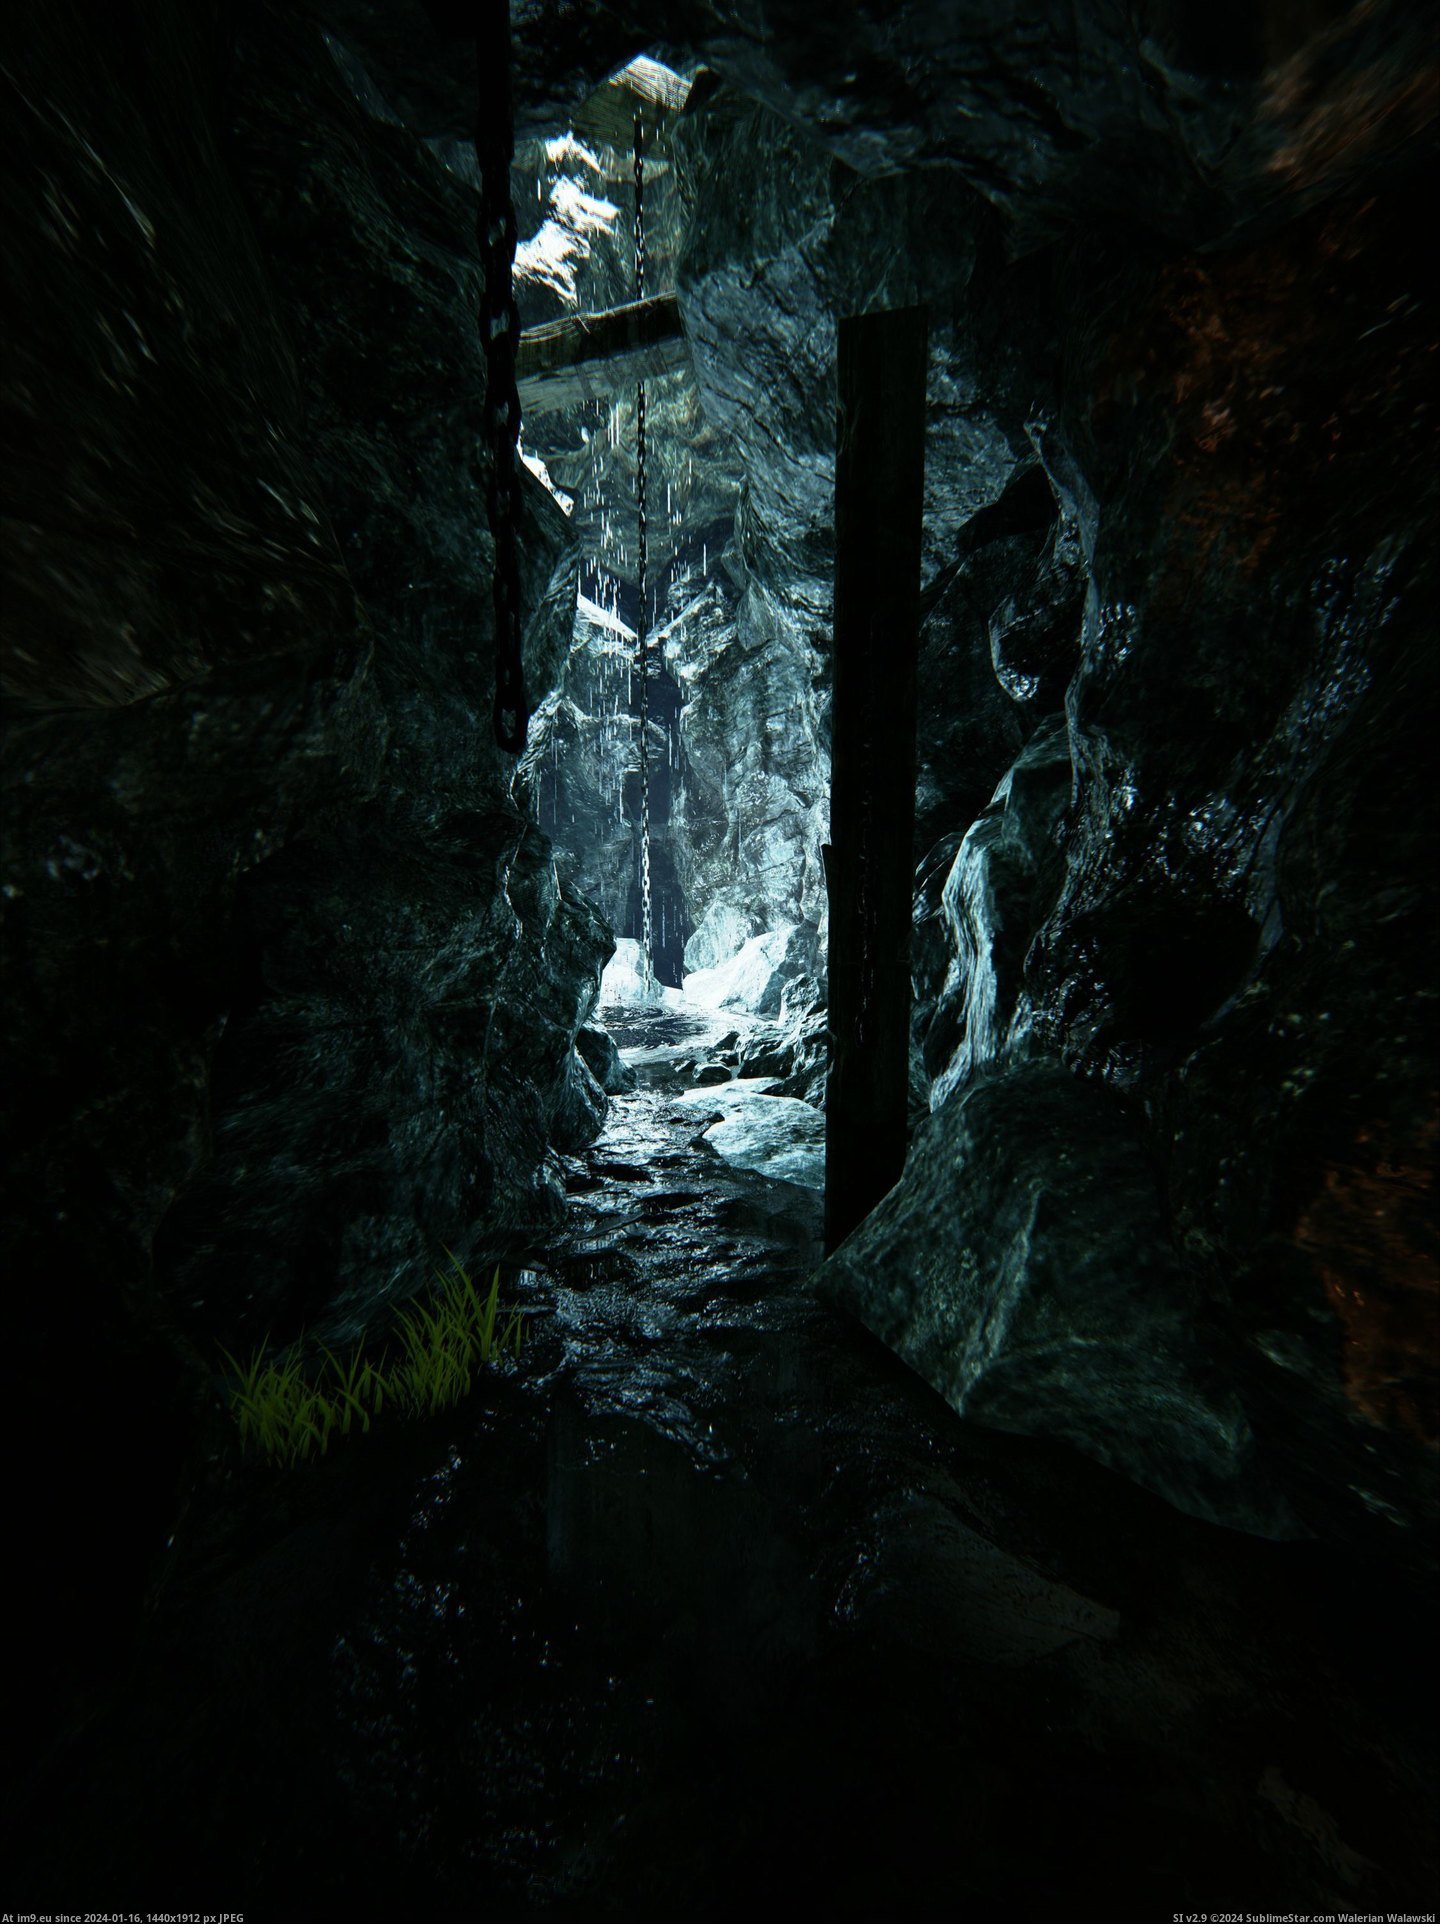 #Gaming #Screenshots #Resolution #Released #Newly #Running #Engine #Unreal [Gaming] Newly released screenshots from Unreal Engine 4 running at 8K resolution 9 Pic. (Obraz z album My r/GAMING favs))